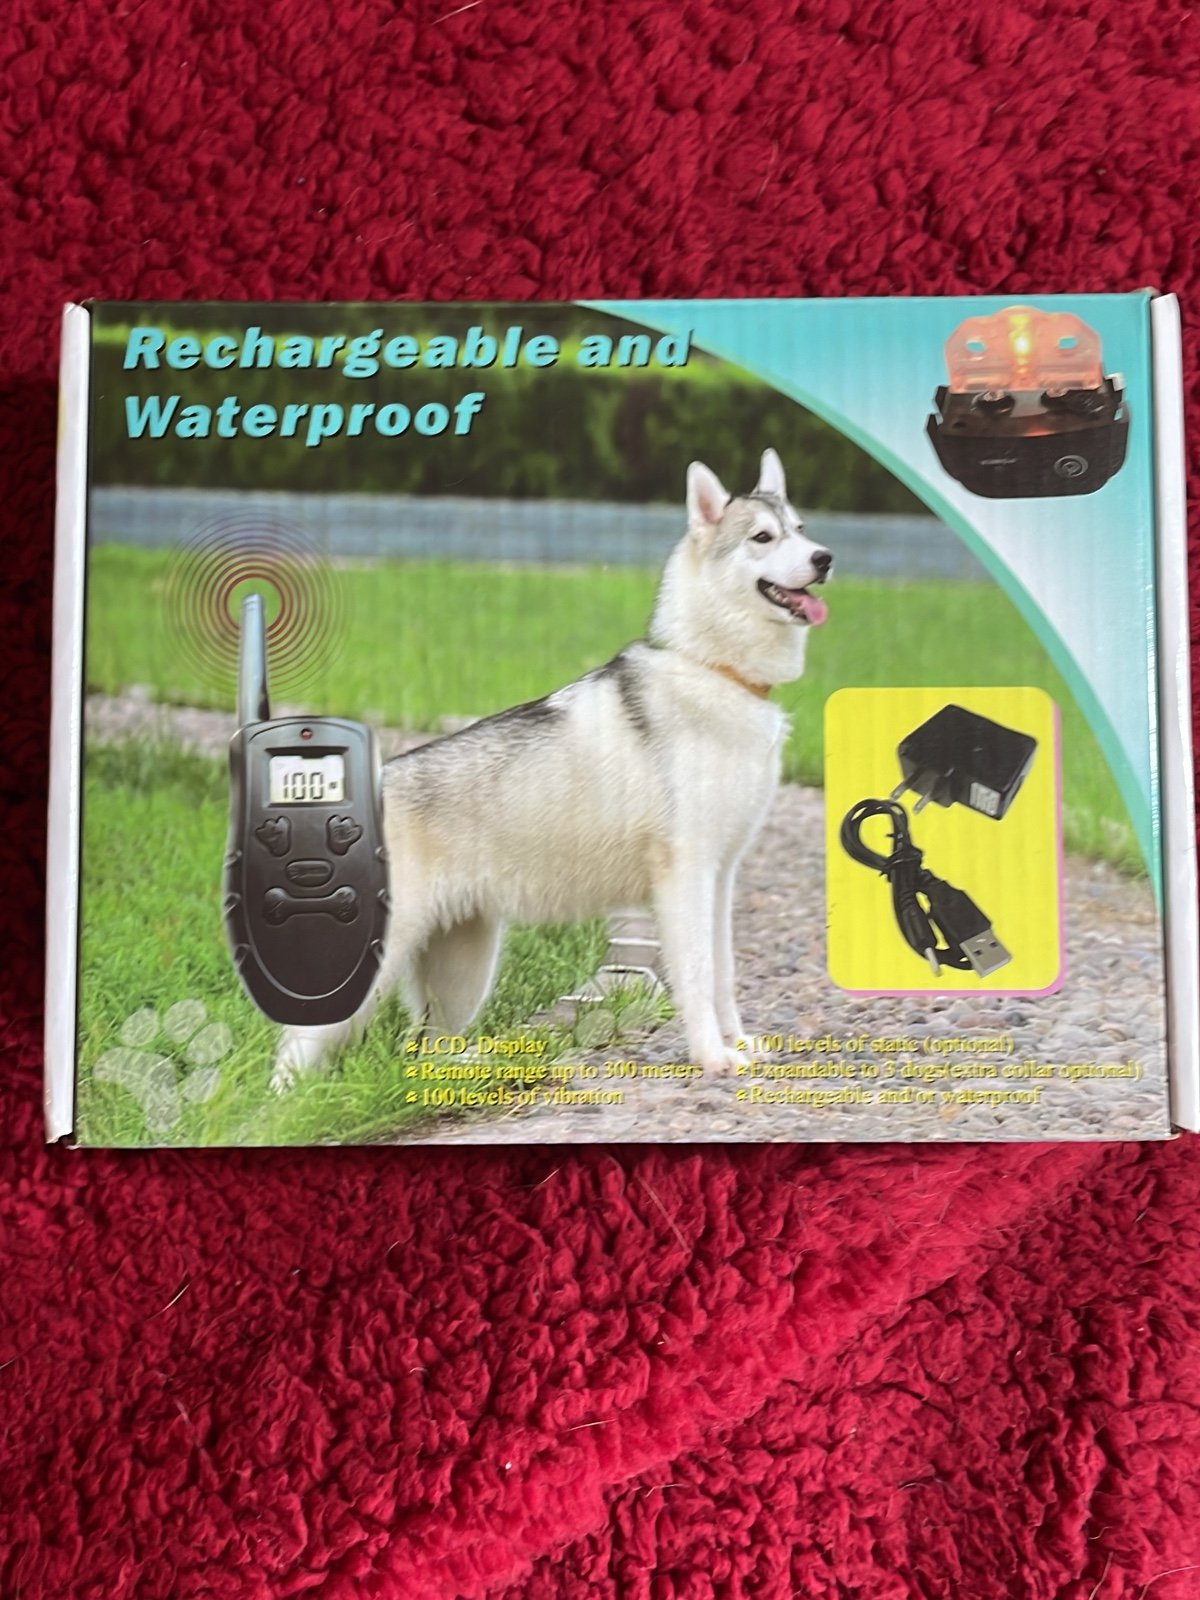 Brand new recharable and waterproof dog training collar r8iEN1a5S